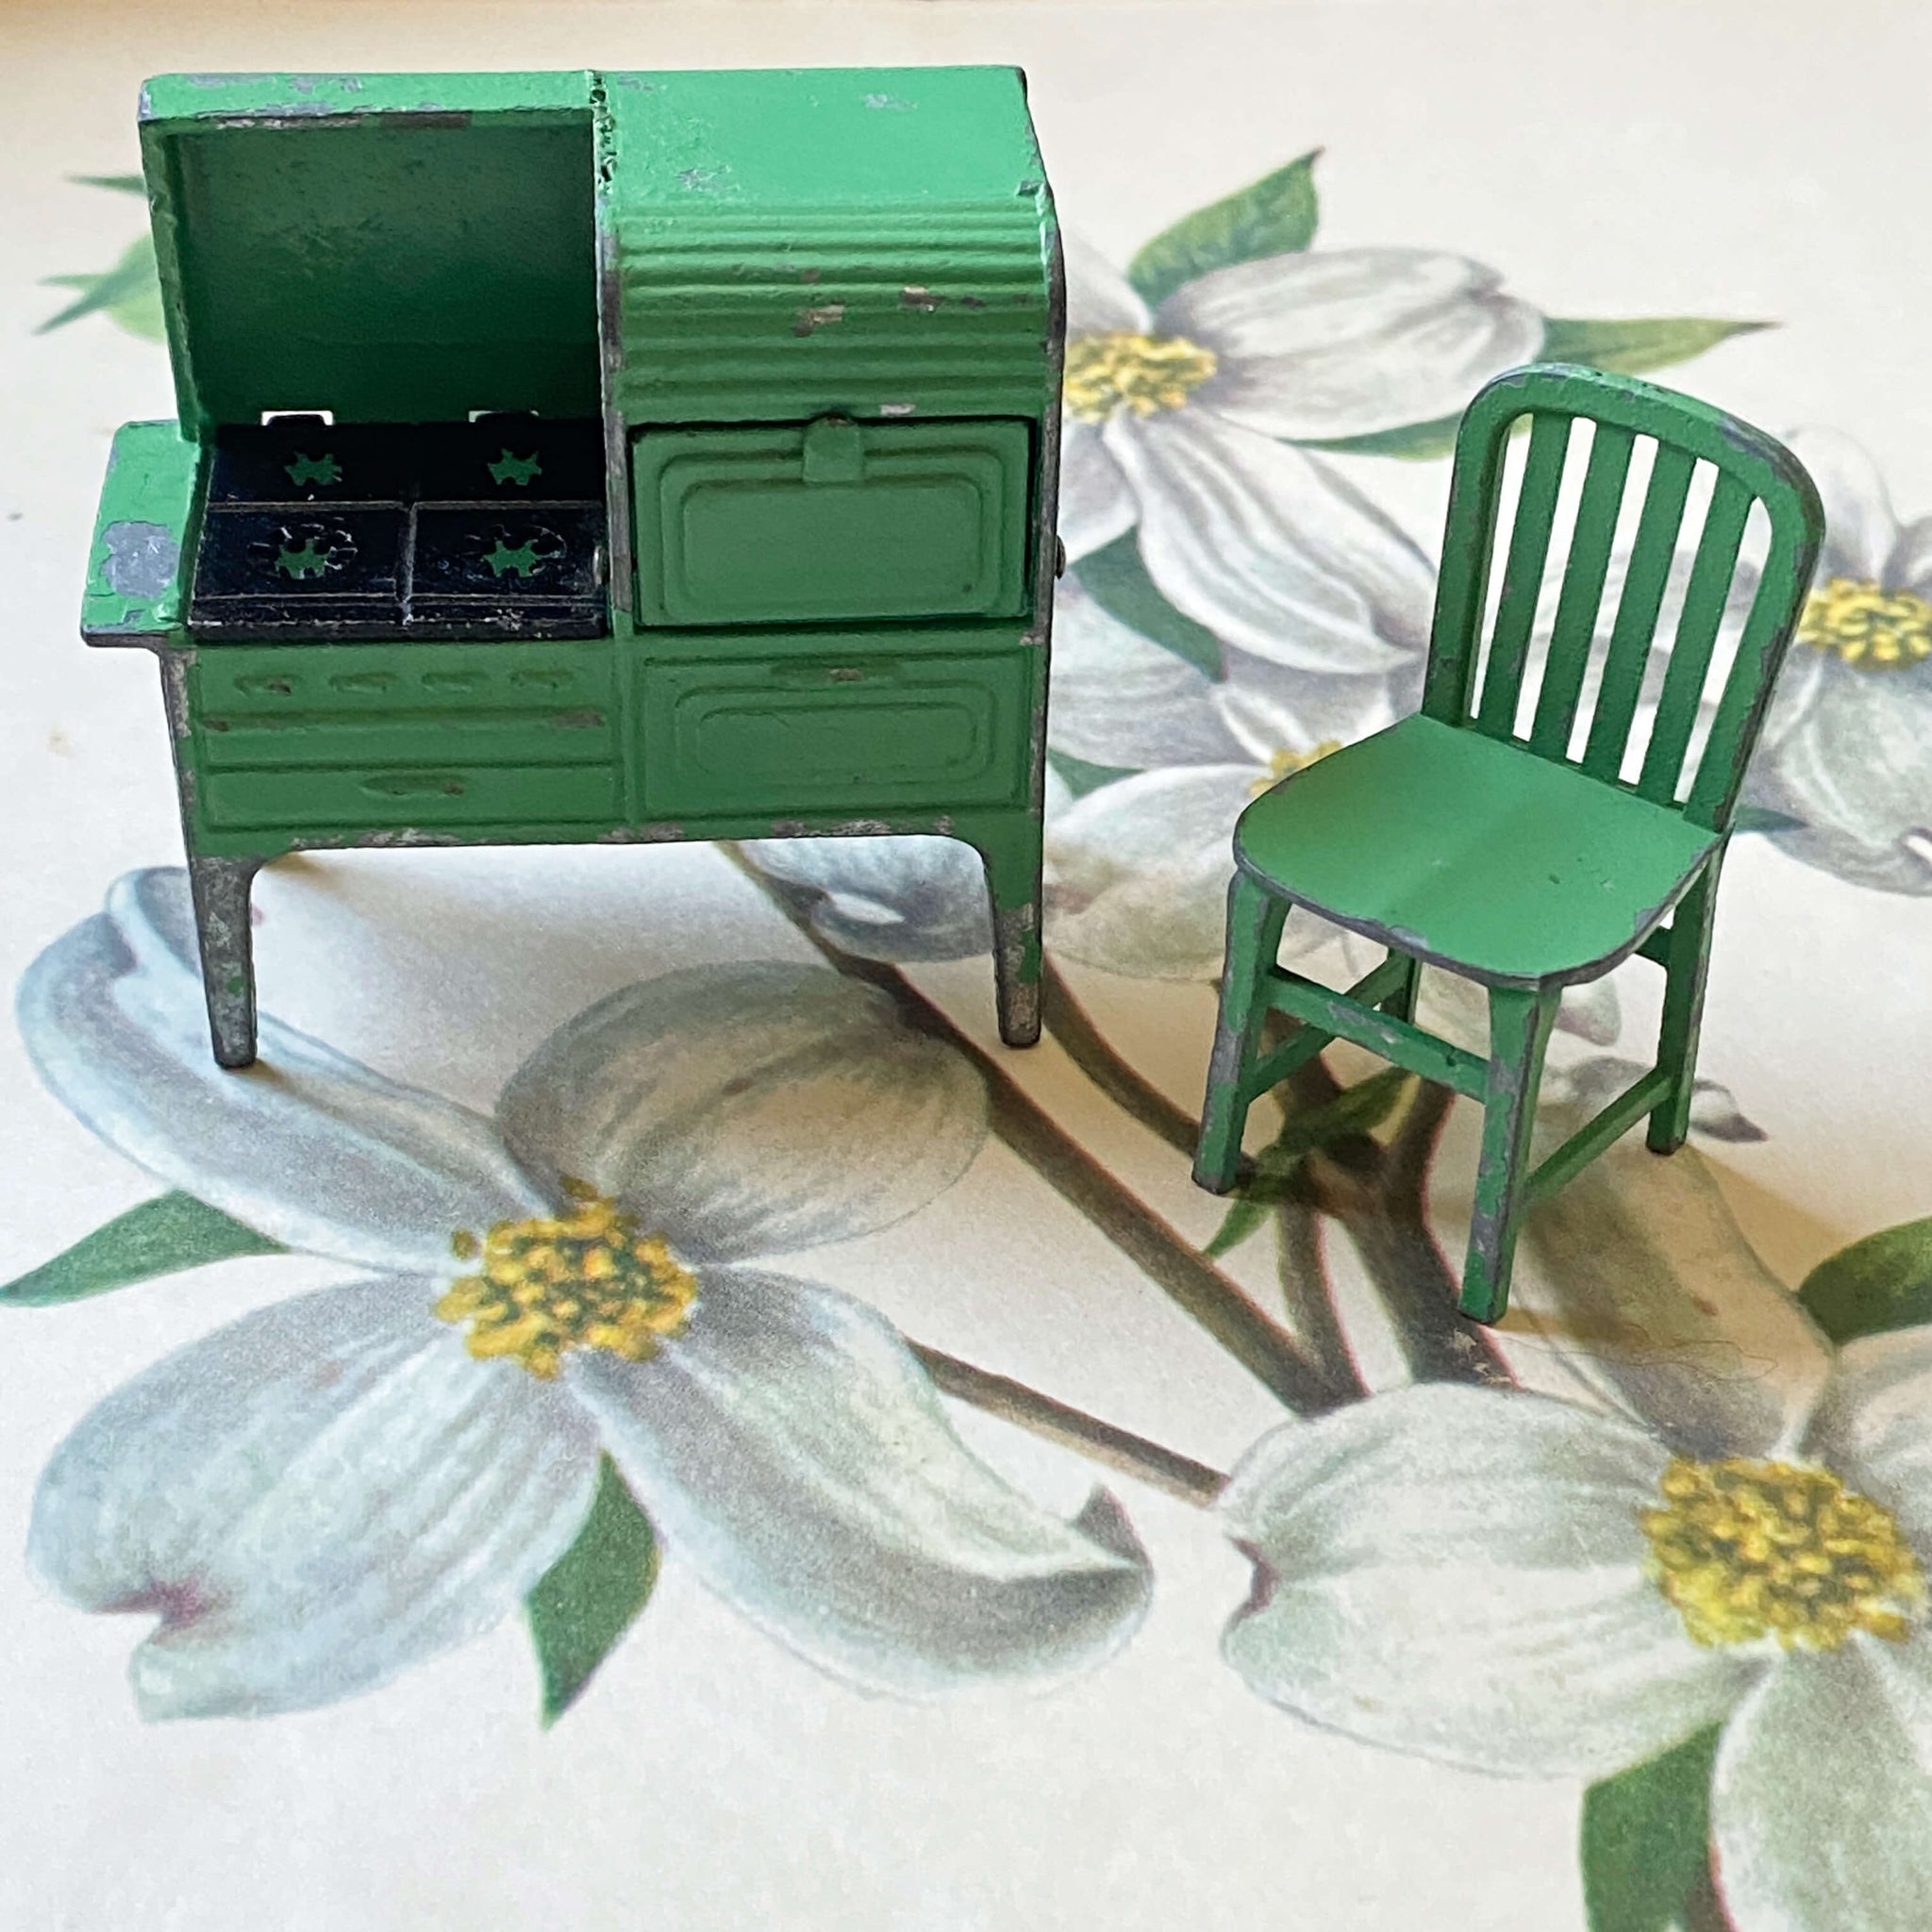 Vintage 1930s Green Tootsietoy Stove and Chair - Miniature Dollhouse Furniture